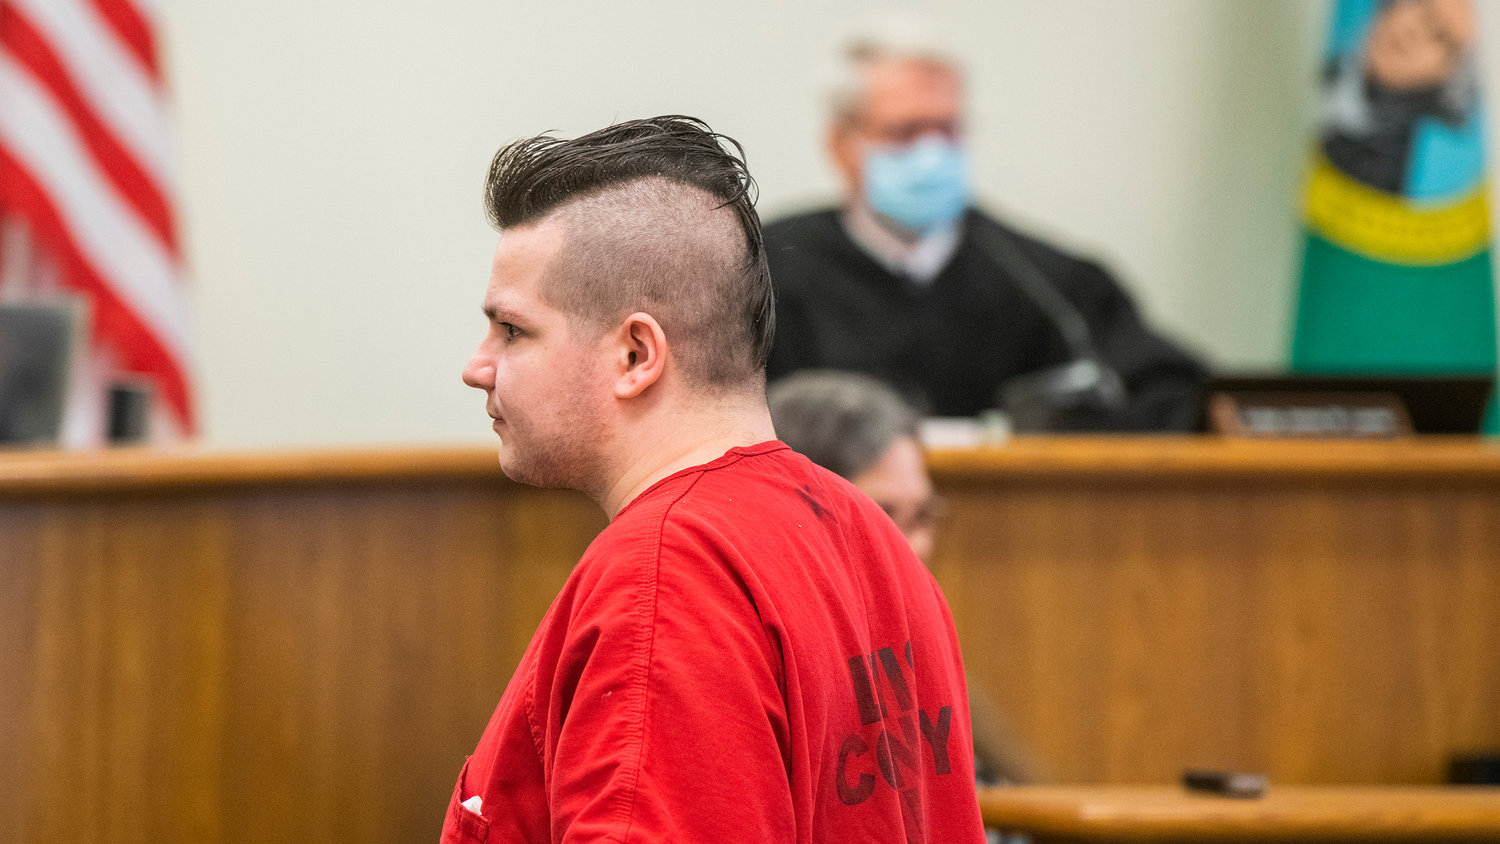 Cristopher Allen Gaudreau appears in Lewis County Superior Court during a sentencing hearing Wednesday morning in Chehalis.